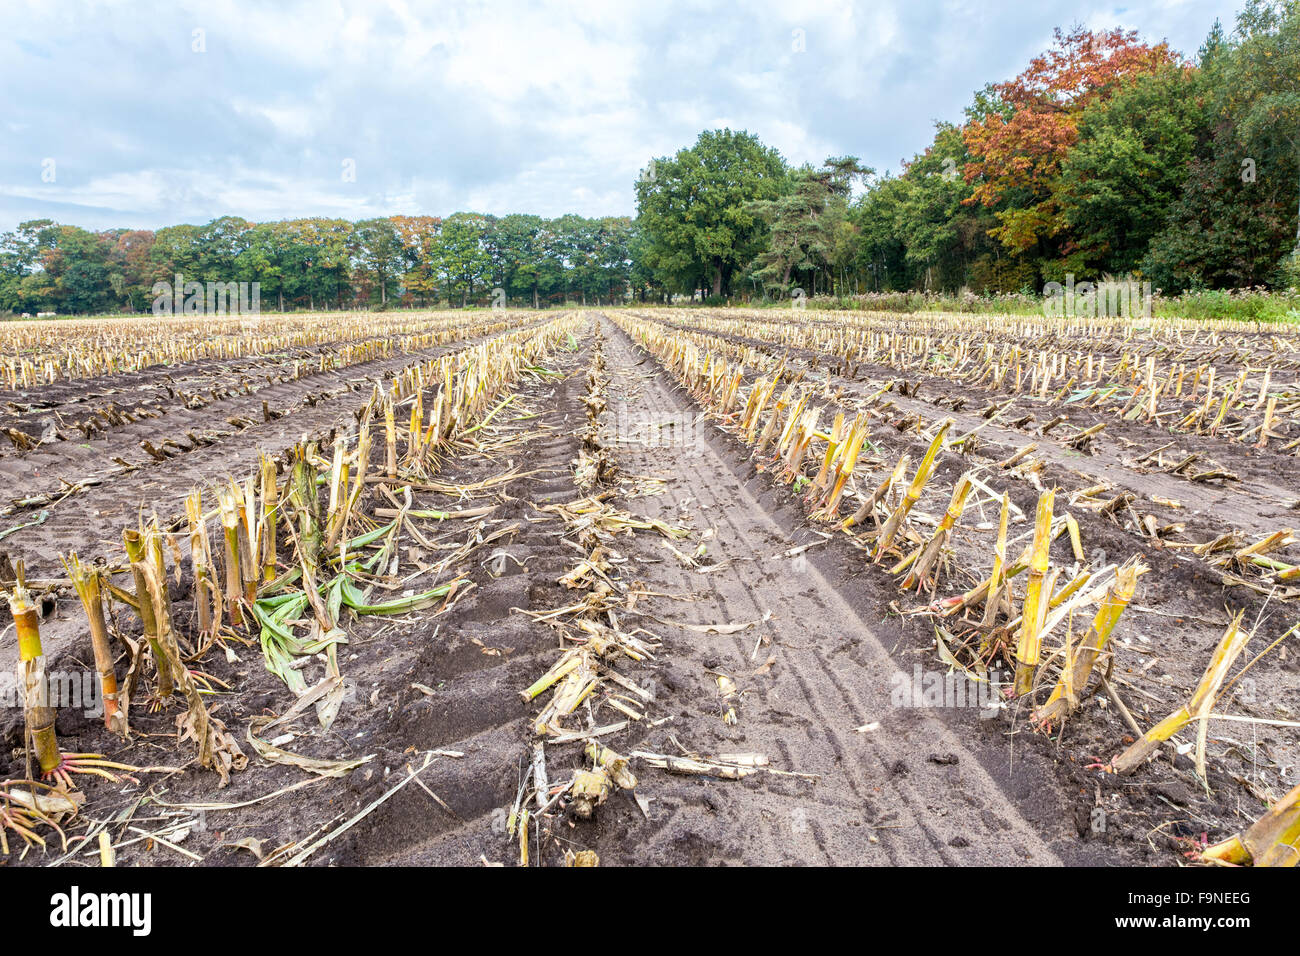 Field with rows of corn stubbles after harvesting in autumn Stock Photo